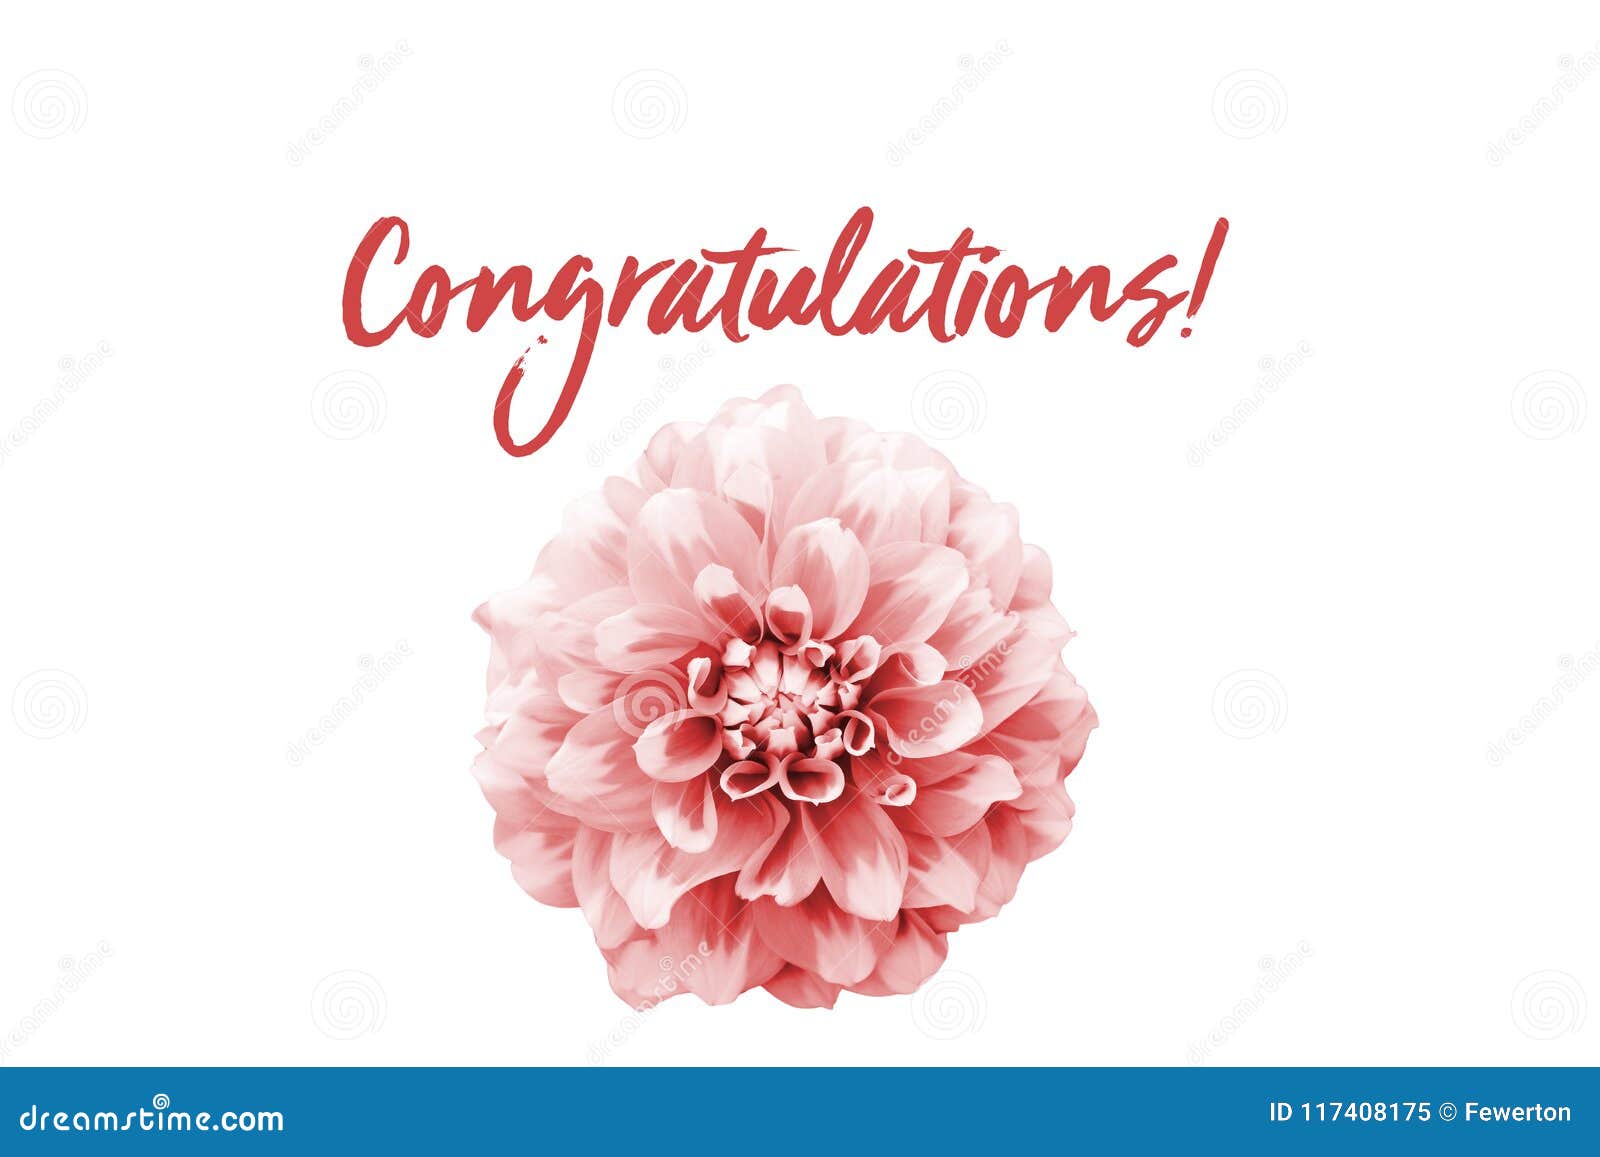 Congratulations Pink Text Message and Pink and White Dahlia Flower ...